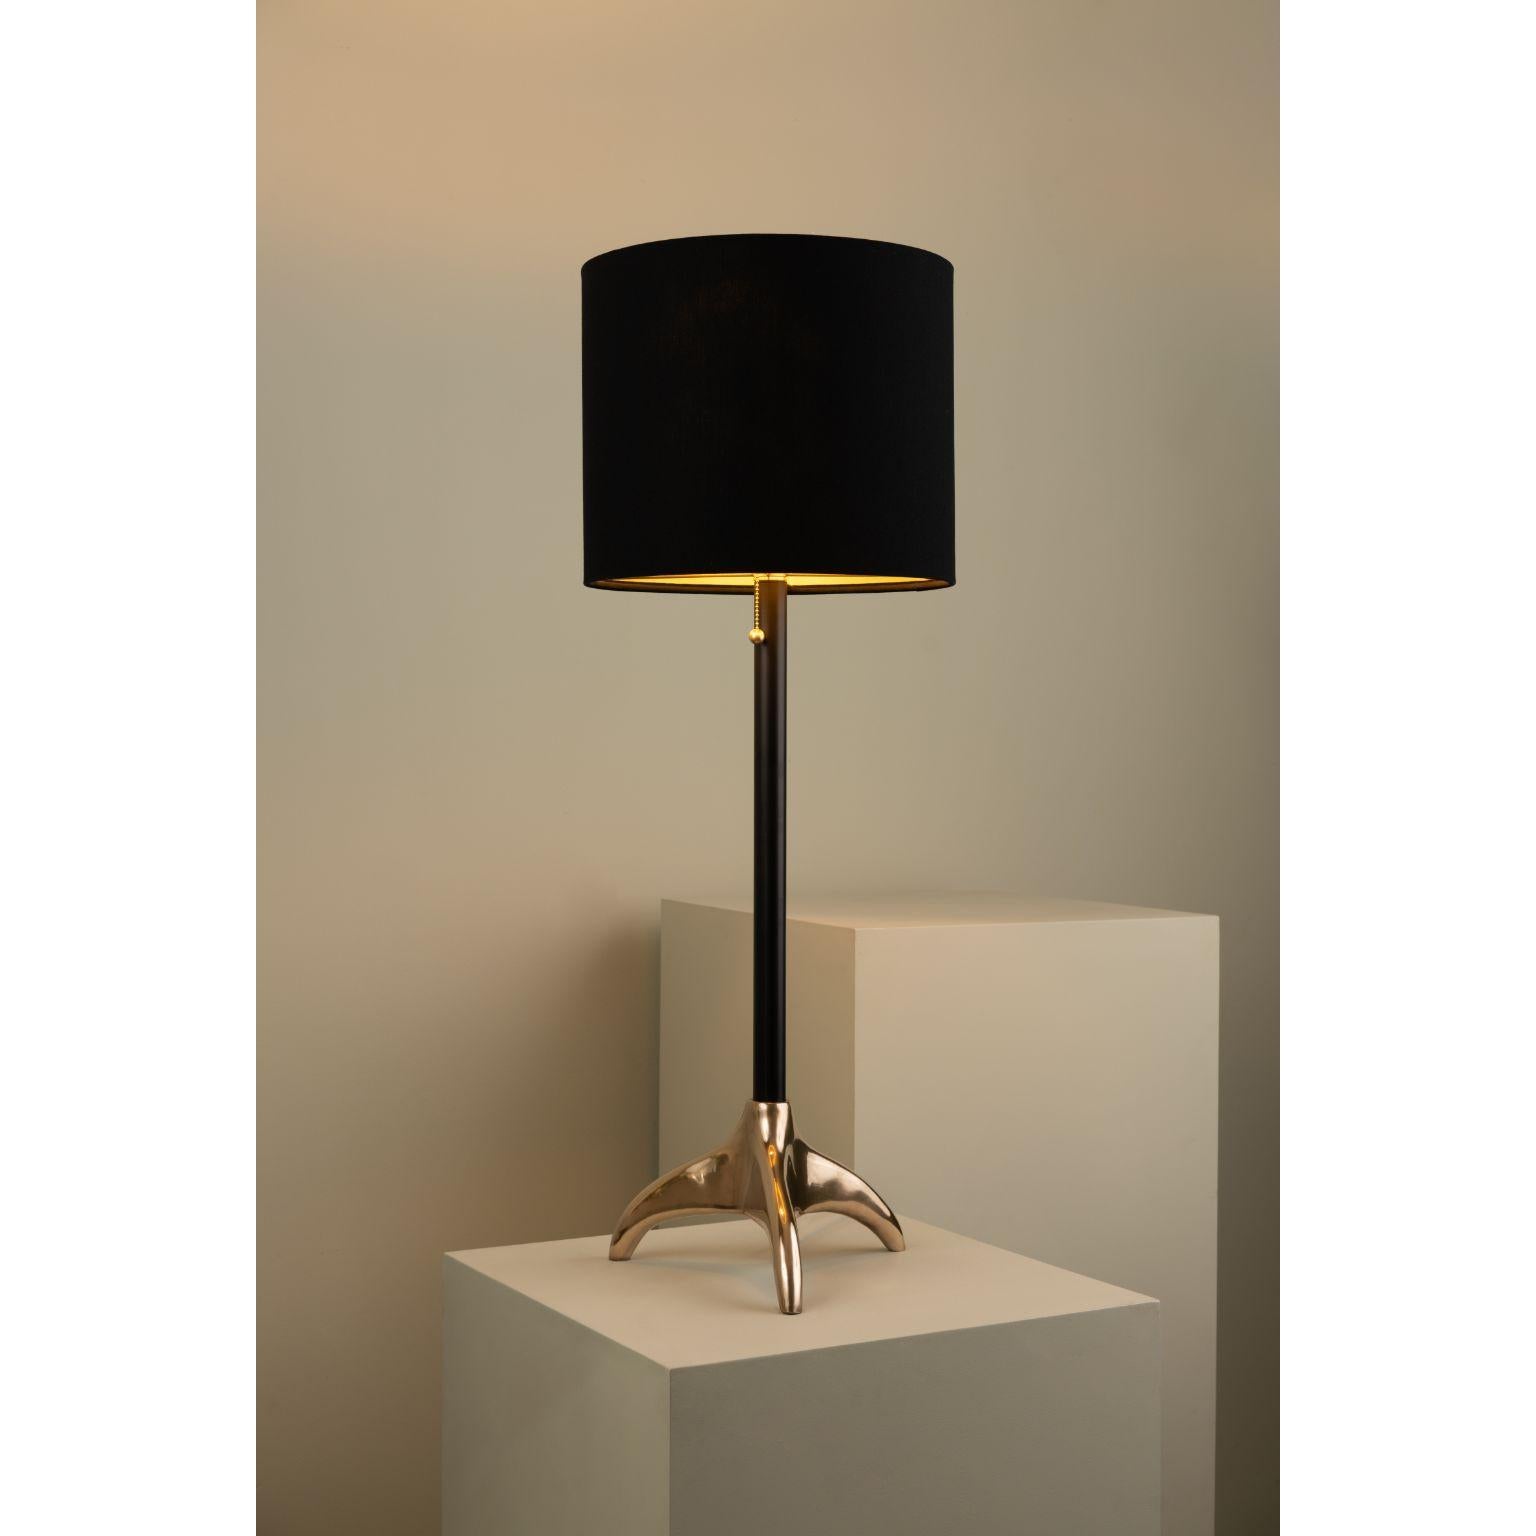 Rino Table Lamp by Isabel Moncada
Dimensions: Ø 35 x H 95 cm.
Materials: Copper, brass, linen and fiberglass.
Weight: 4.6 kg.

The base of the Rino fixture is a bronze sculpture that alludes to the shapes of
the triple antlers of the rhinoceros